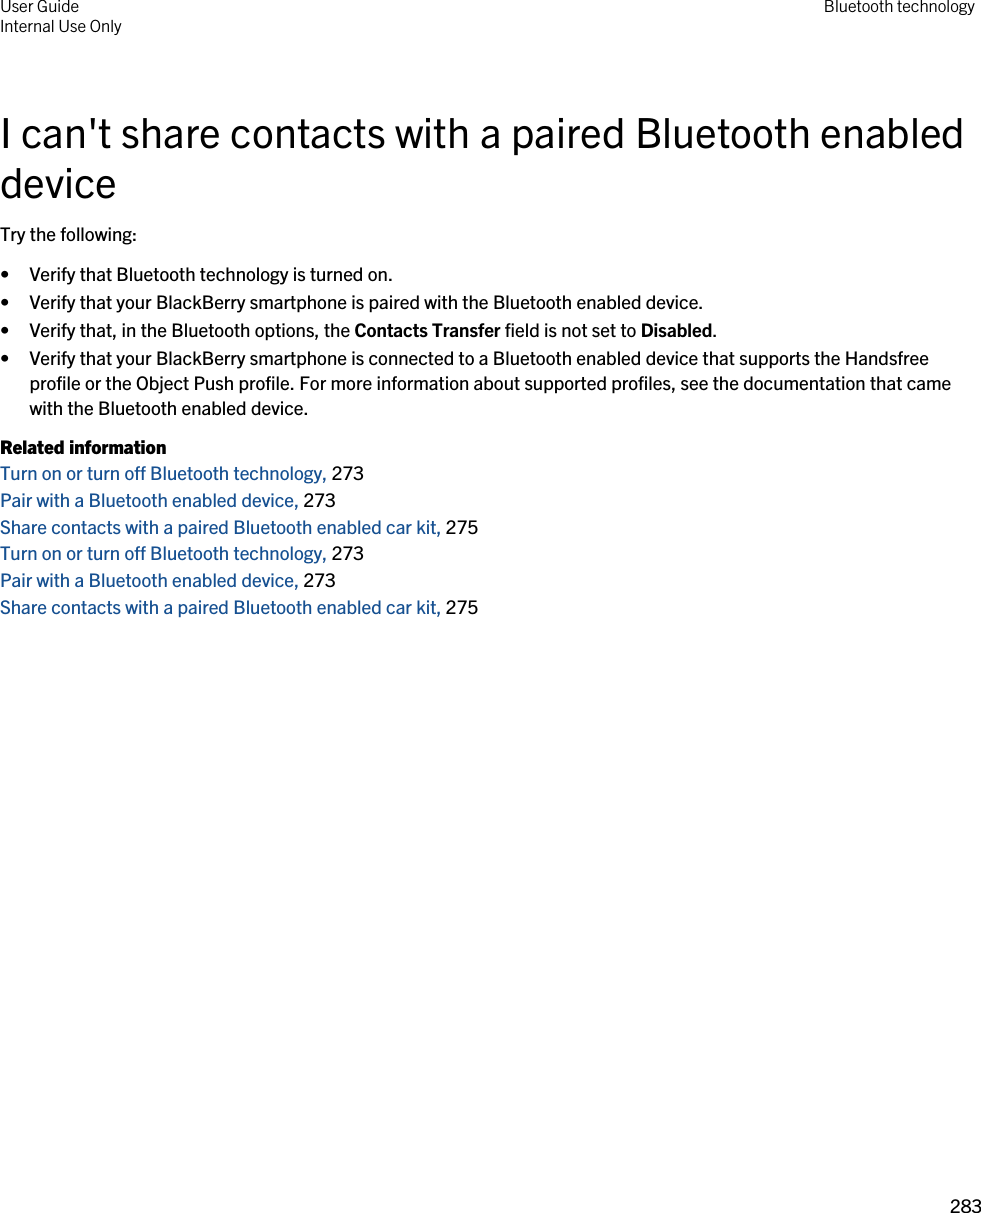 I can&apos;t share contacts with a paired Bluetooth enabled deviceTry the following:• Verify that Bluetooth technology is turned on.• Verify that your BlackBerry smartphone is paired with the Bluetooth enabled device.• Verify that, in the Bluetooth options, the Contacts Transfer field is not set to Disabled.• Verify that your BlackBerry smartphone is connected to a Bluetooth enabled device that supports the Handsfree profile or the Object Push profile. For more information about supported profiles, see the documentation that came with the Bluetooth enabled device.Related informationTurn on or turn off Bluetooth technology, 273 Pair with a Bluetooth enabled device, 273 Share contacts with a paired Bluetooth enabled car kit, 275 Turn on or turn off Bluetooth technology, 273 Pair with a Bluetooth enabled device, 273 Share contacts with a paired Bluetooth enabled car kit, 275 User GuideInternal Use Only Bluetooth technology283 